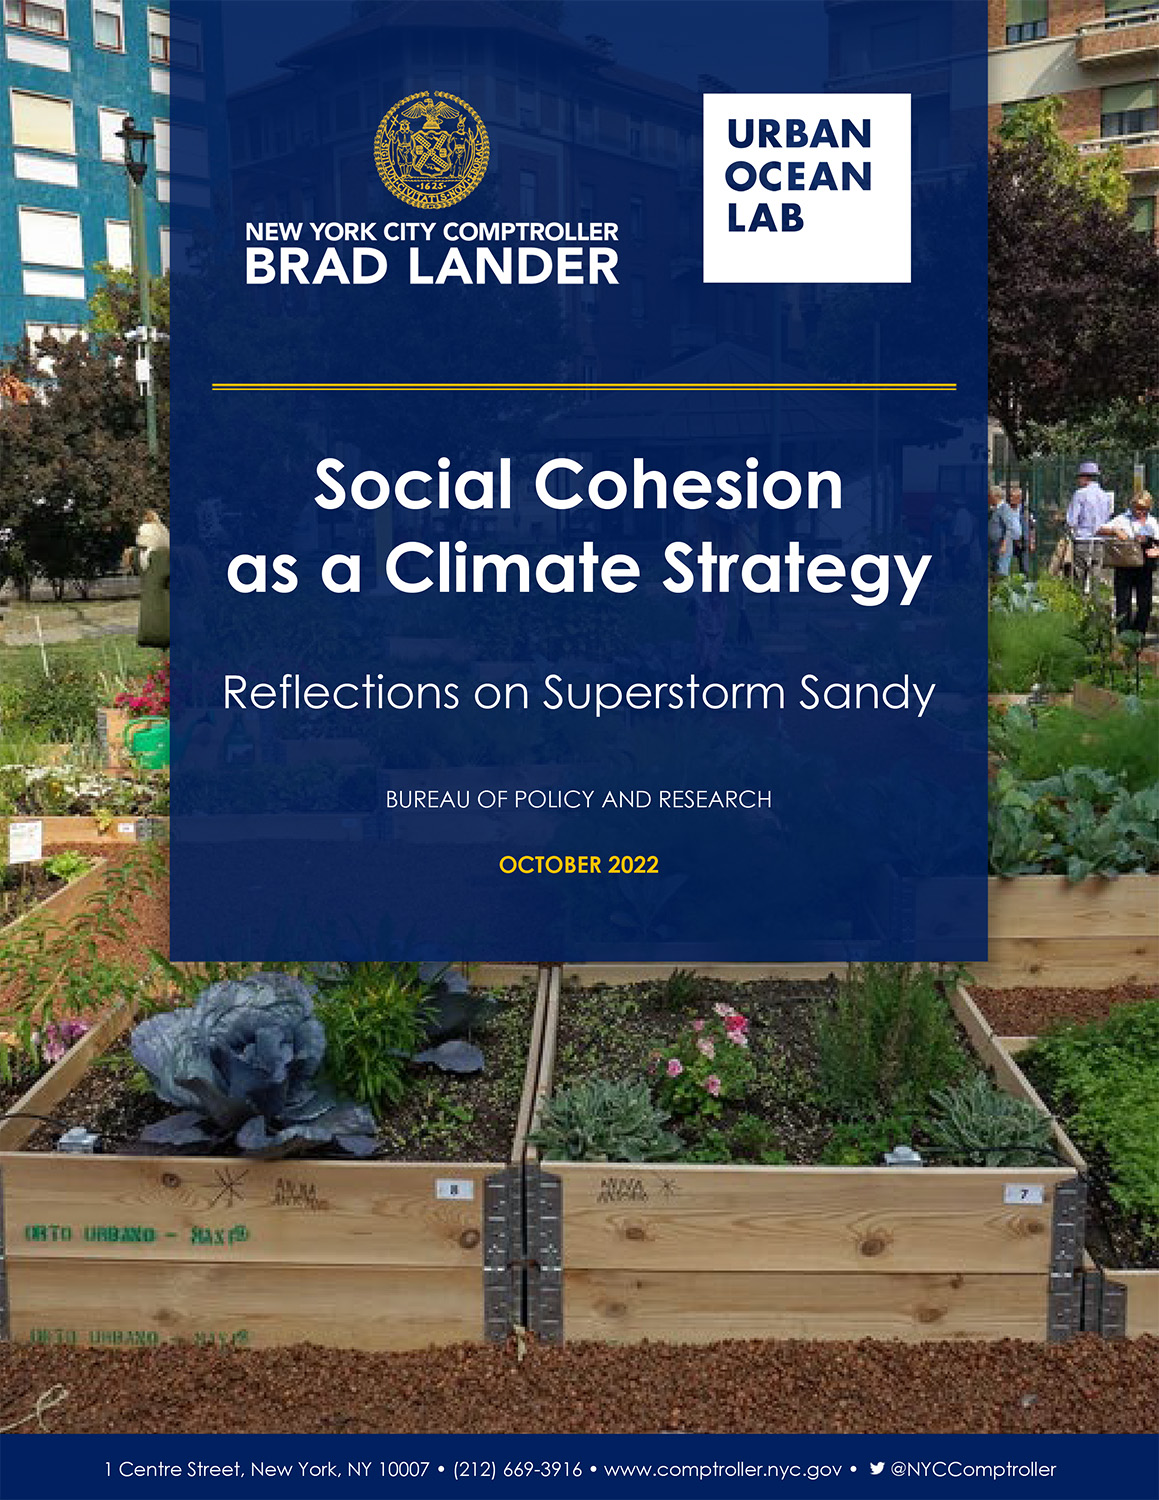 Social cohesion as a climate strategy: Reflections on Superstorm Sandy